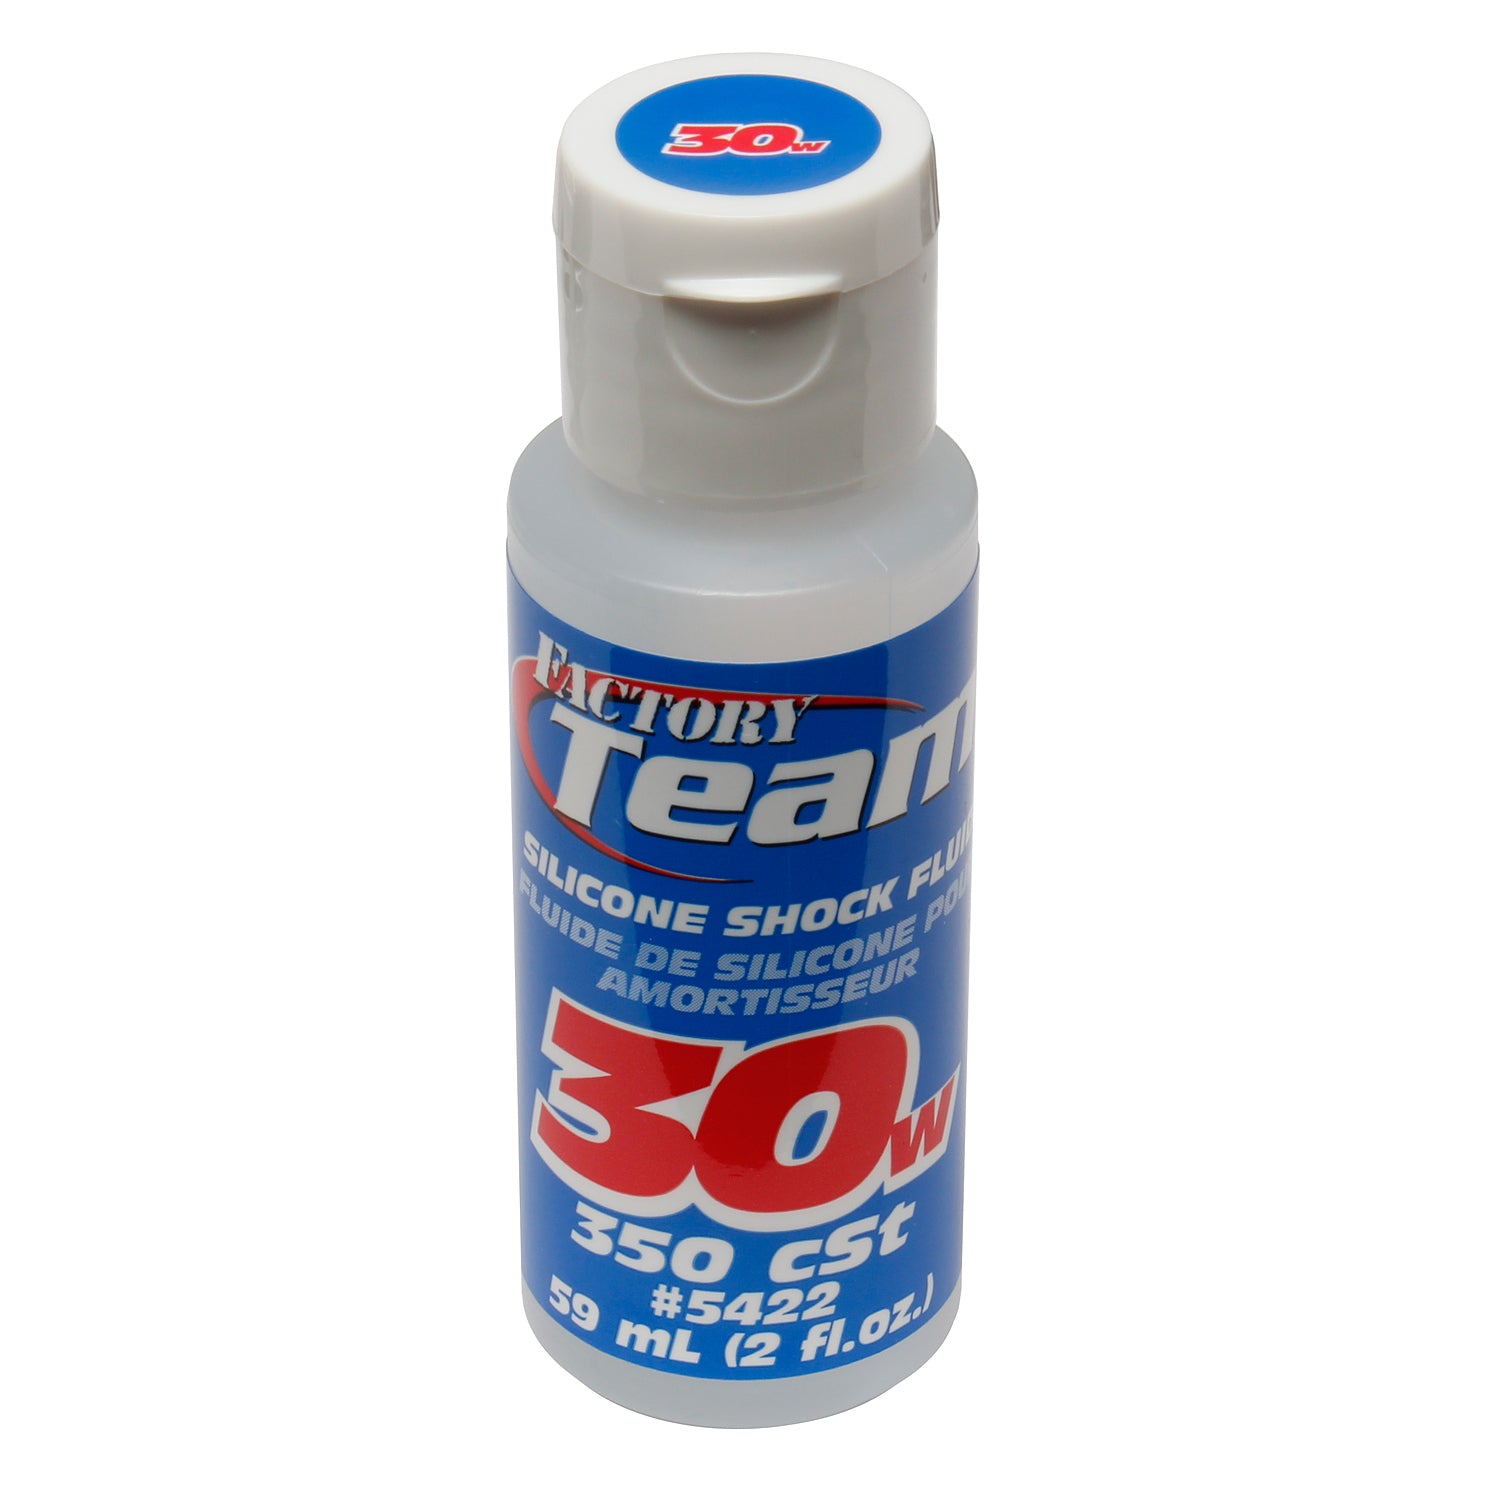 Team Associated 30W (350 Cst) Silicone Shock Oil 59Ml #5422